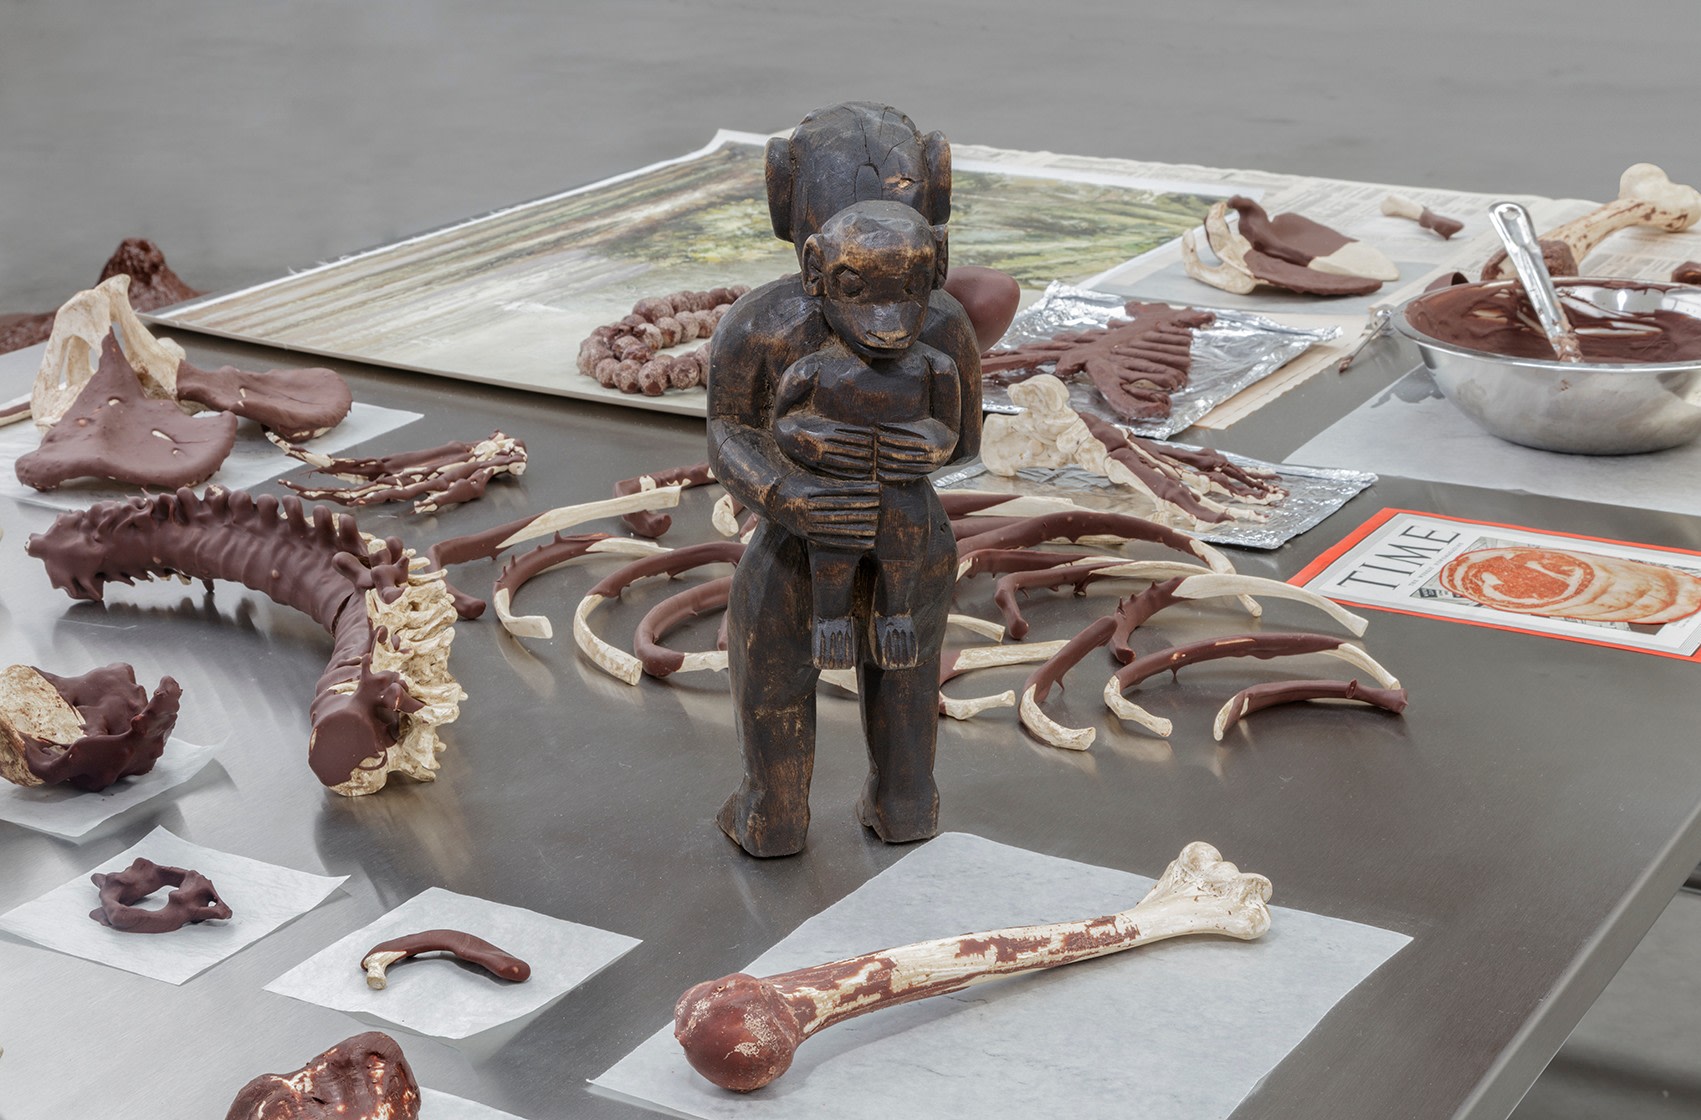 from the archive - minerva cuevas - Archive - Kurimanzutto